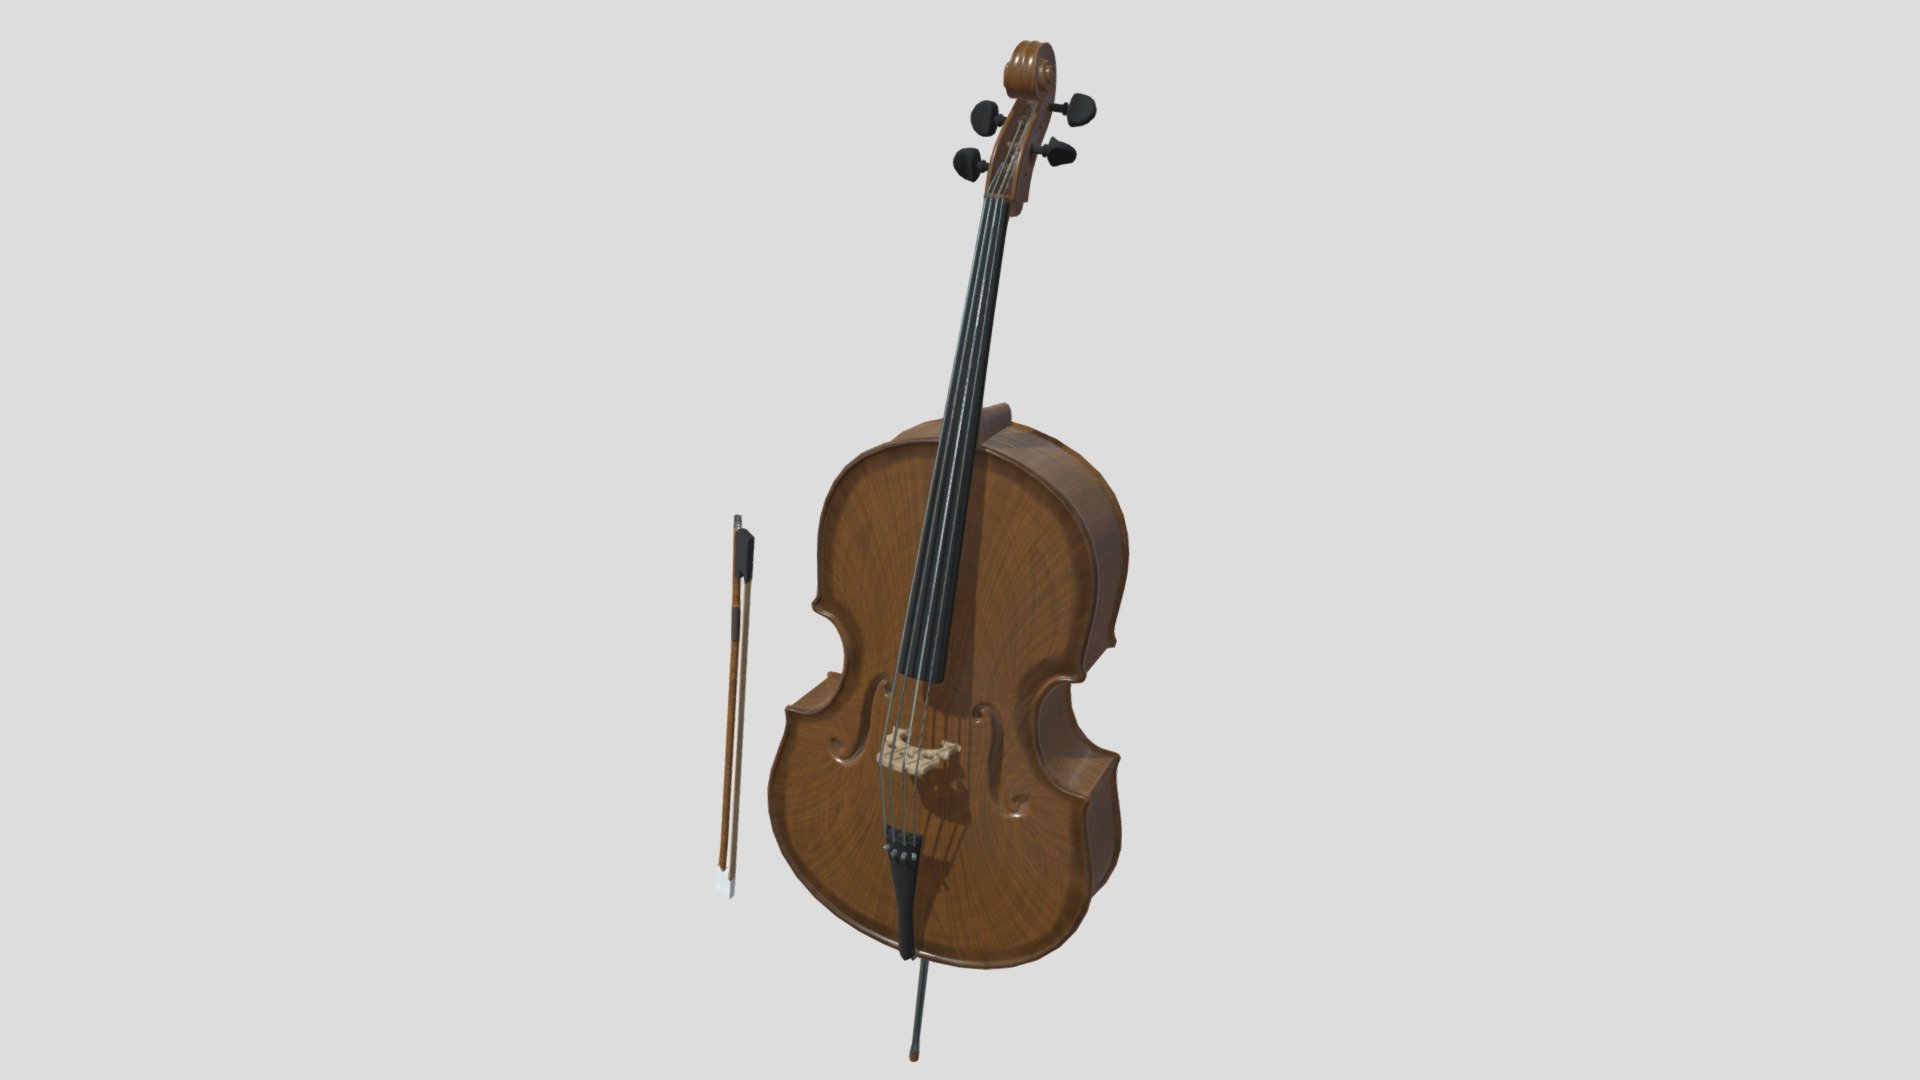 3d model of a Cello. Perfect for games, scenes or renders.

Model is correctly divided into main parts. All main parts are presented as separate parts therefore materials of objects are easy to be modified or removed and standard parts are easy to be replaced.

TEXTURES: Models includes high textures with maps: Base Color (.png) Height (.png) Metallic (.png) Normal (.png) Roughness (.png)

FORMATS: .obj .dae .stl .blend .fbx .3ds

GENERAL: Easy editable. Model is fully textured.

Vertices: 12.7 k Polygons: 12.2 k

All formats have been tested and work correctly.

Some files may need textures or materials adjusted or added depending on the program they are imported into 3d model